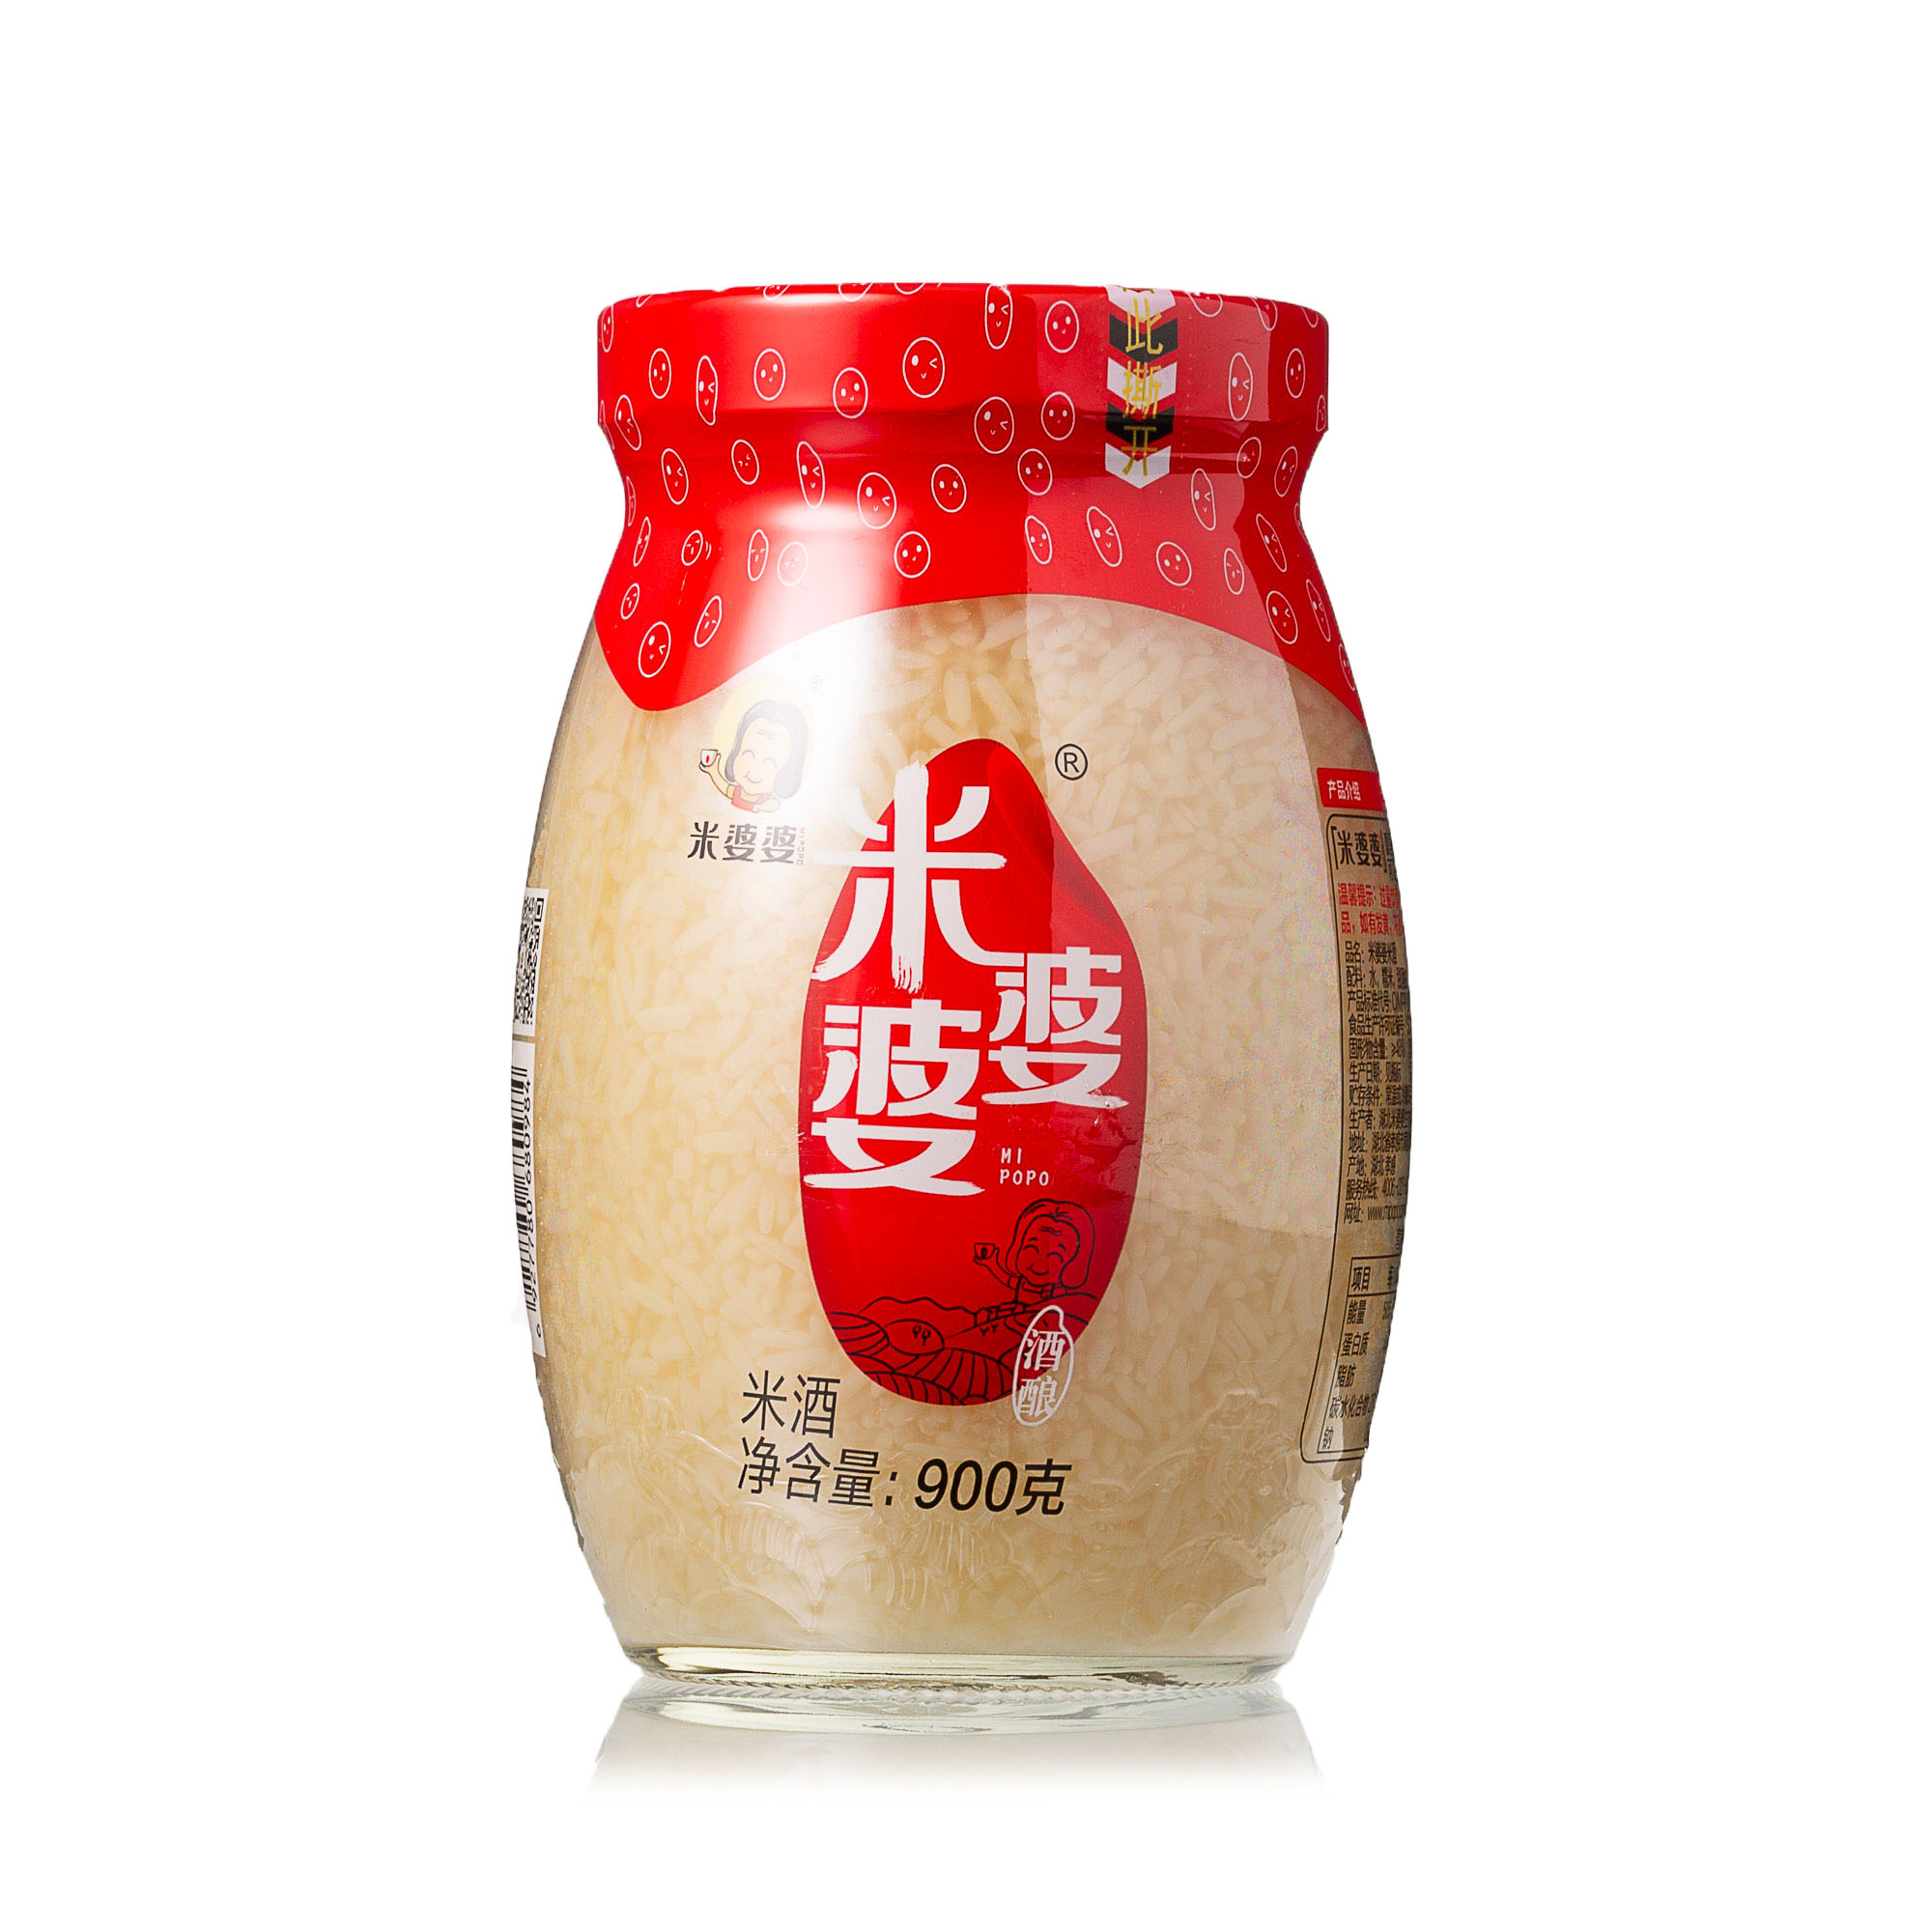 Mi Popo Glutinous Rice Wine 900g-eBest-Pickled products,Pantry